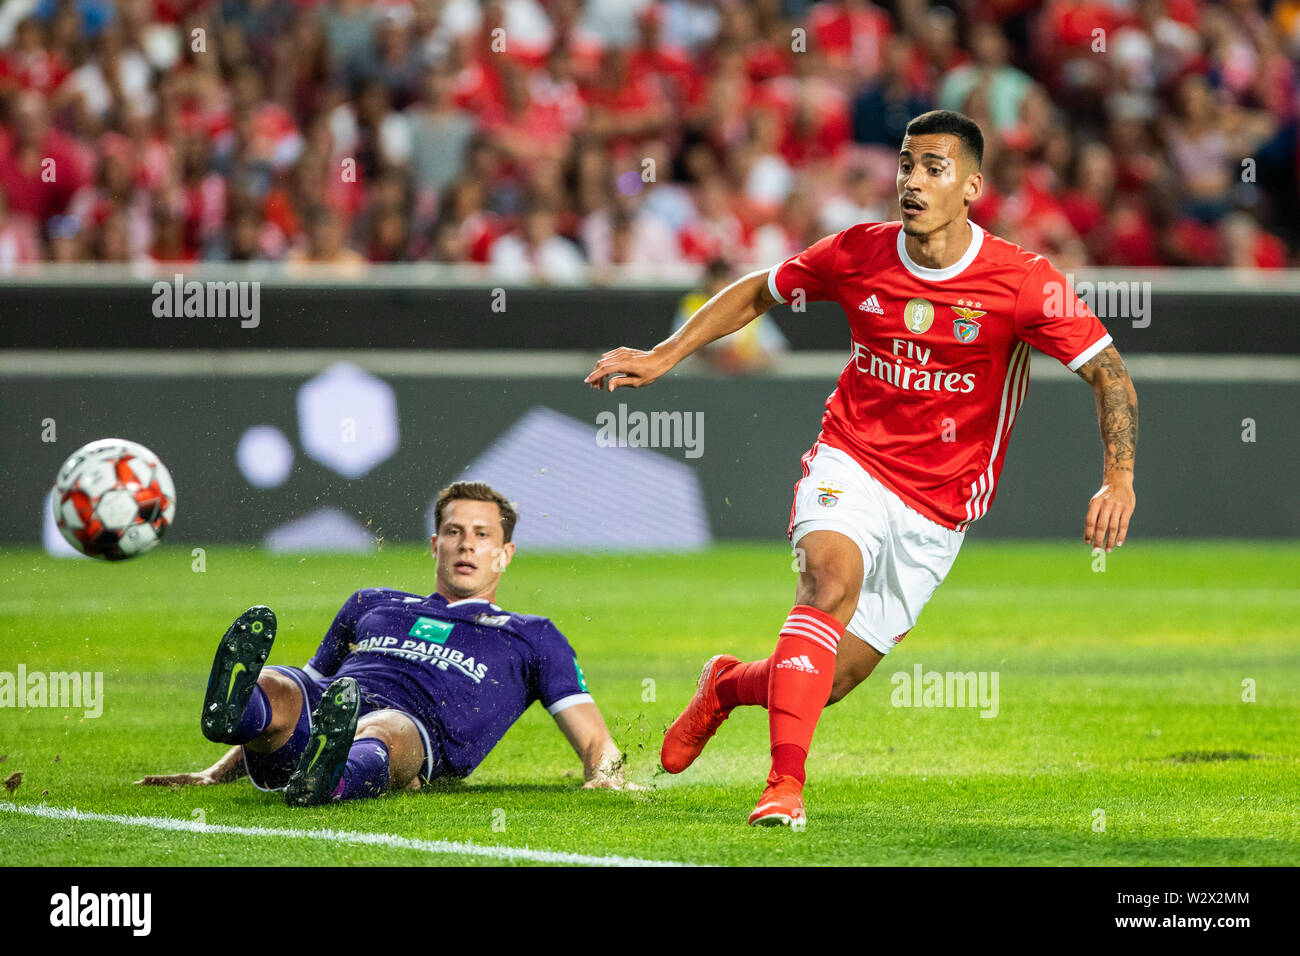 Lisbon, Portugal. 10th July, 2019. Chiquinho (Francisco Leonel Lima Silva Machado) of SL Benfica in action during the Pre-Season football match 2019/2020 between SL Benfica vs Royal Sporting Club Anderlecht.(Final score: SL Benfica 1 - 2 Royal Sporting Club Anderlecht) Credit: SOPA Images Limited/Alamy Live News Stock Photo